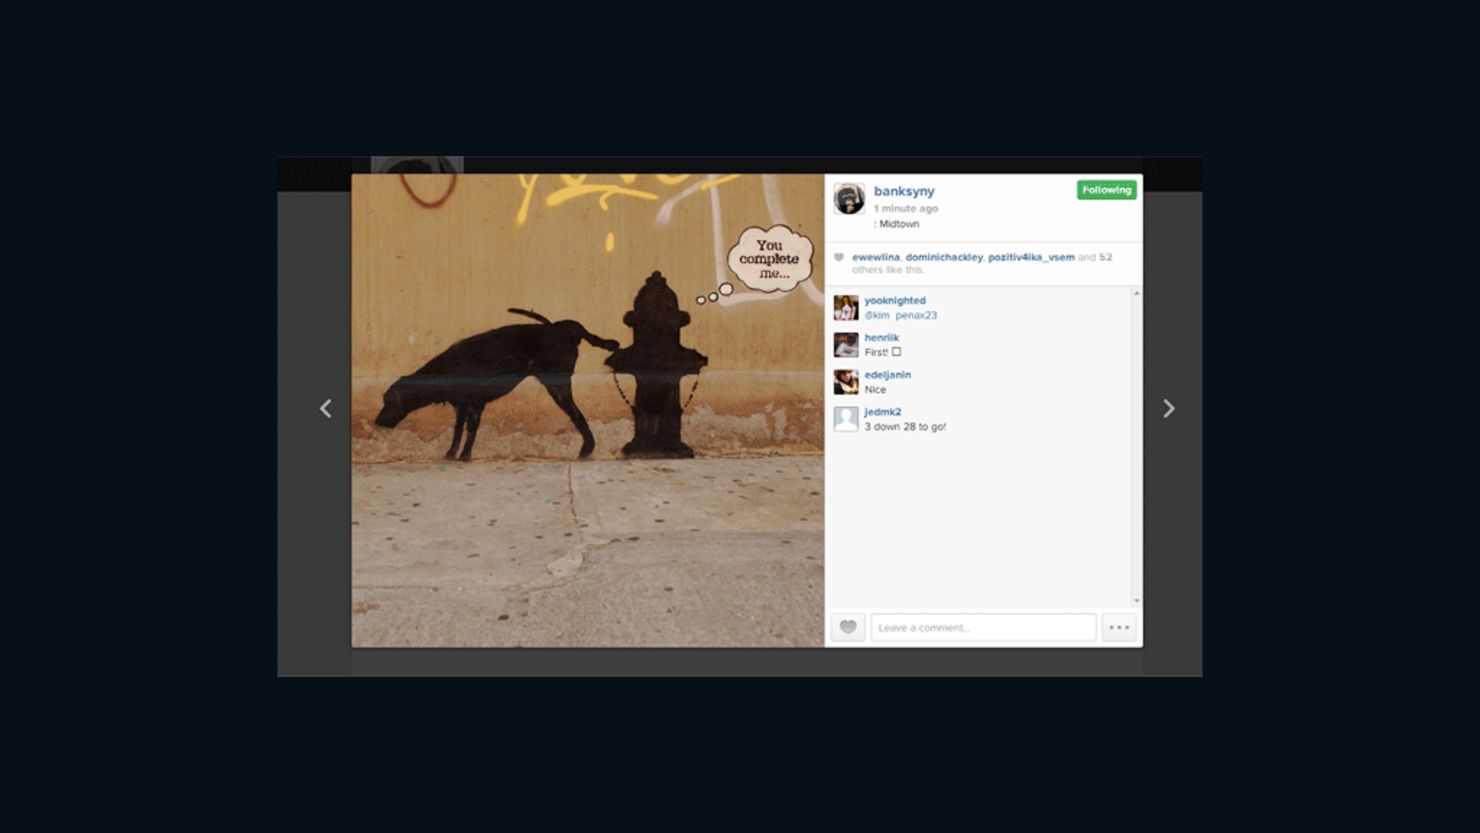 Banksy has been posting images of his New York works on his Instagram account.